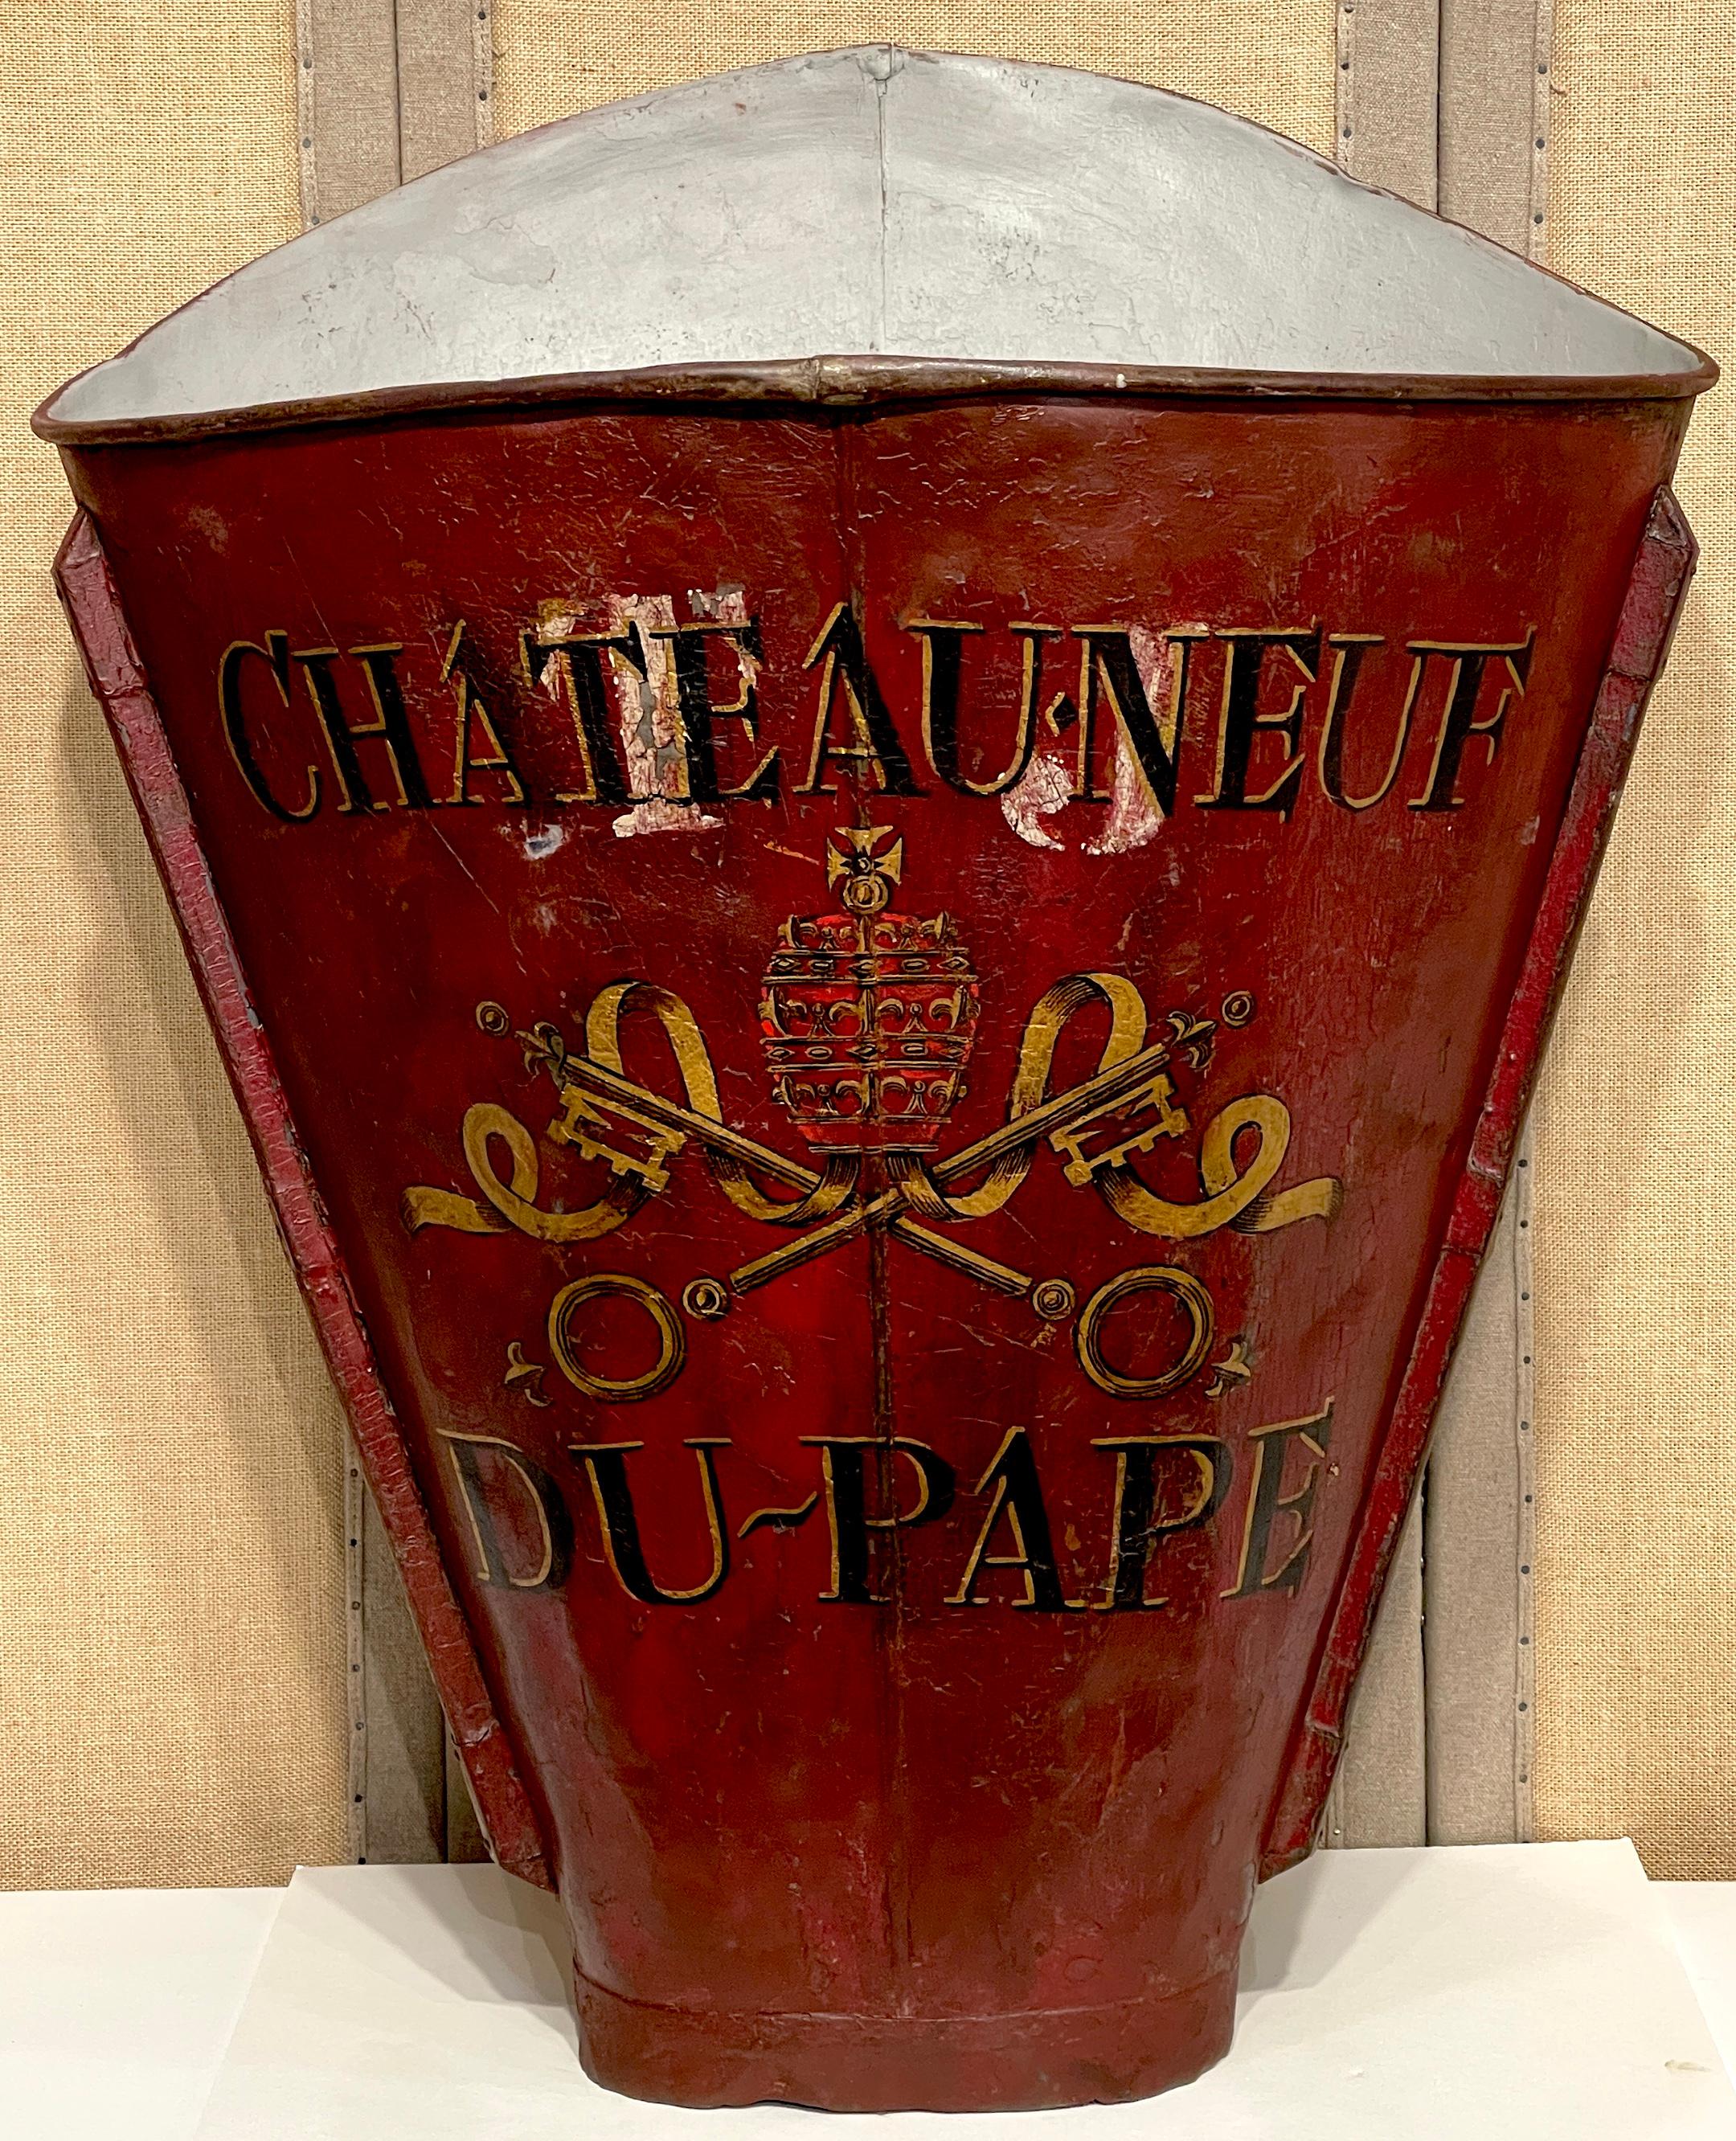 Antique Chateauneuf de Pape  Red & Gilt Zinc Grape Hod
France, Circa 1900s

A  fine example from world of French winemaking history with this exquisite Antique Chateauneuf de Pape Red & Gilt Zinc Grape Hod, a rare find dating back to the 1900s. Well